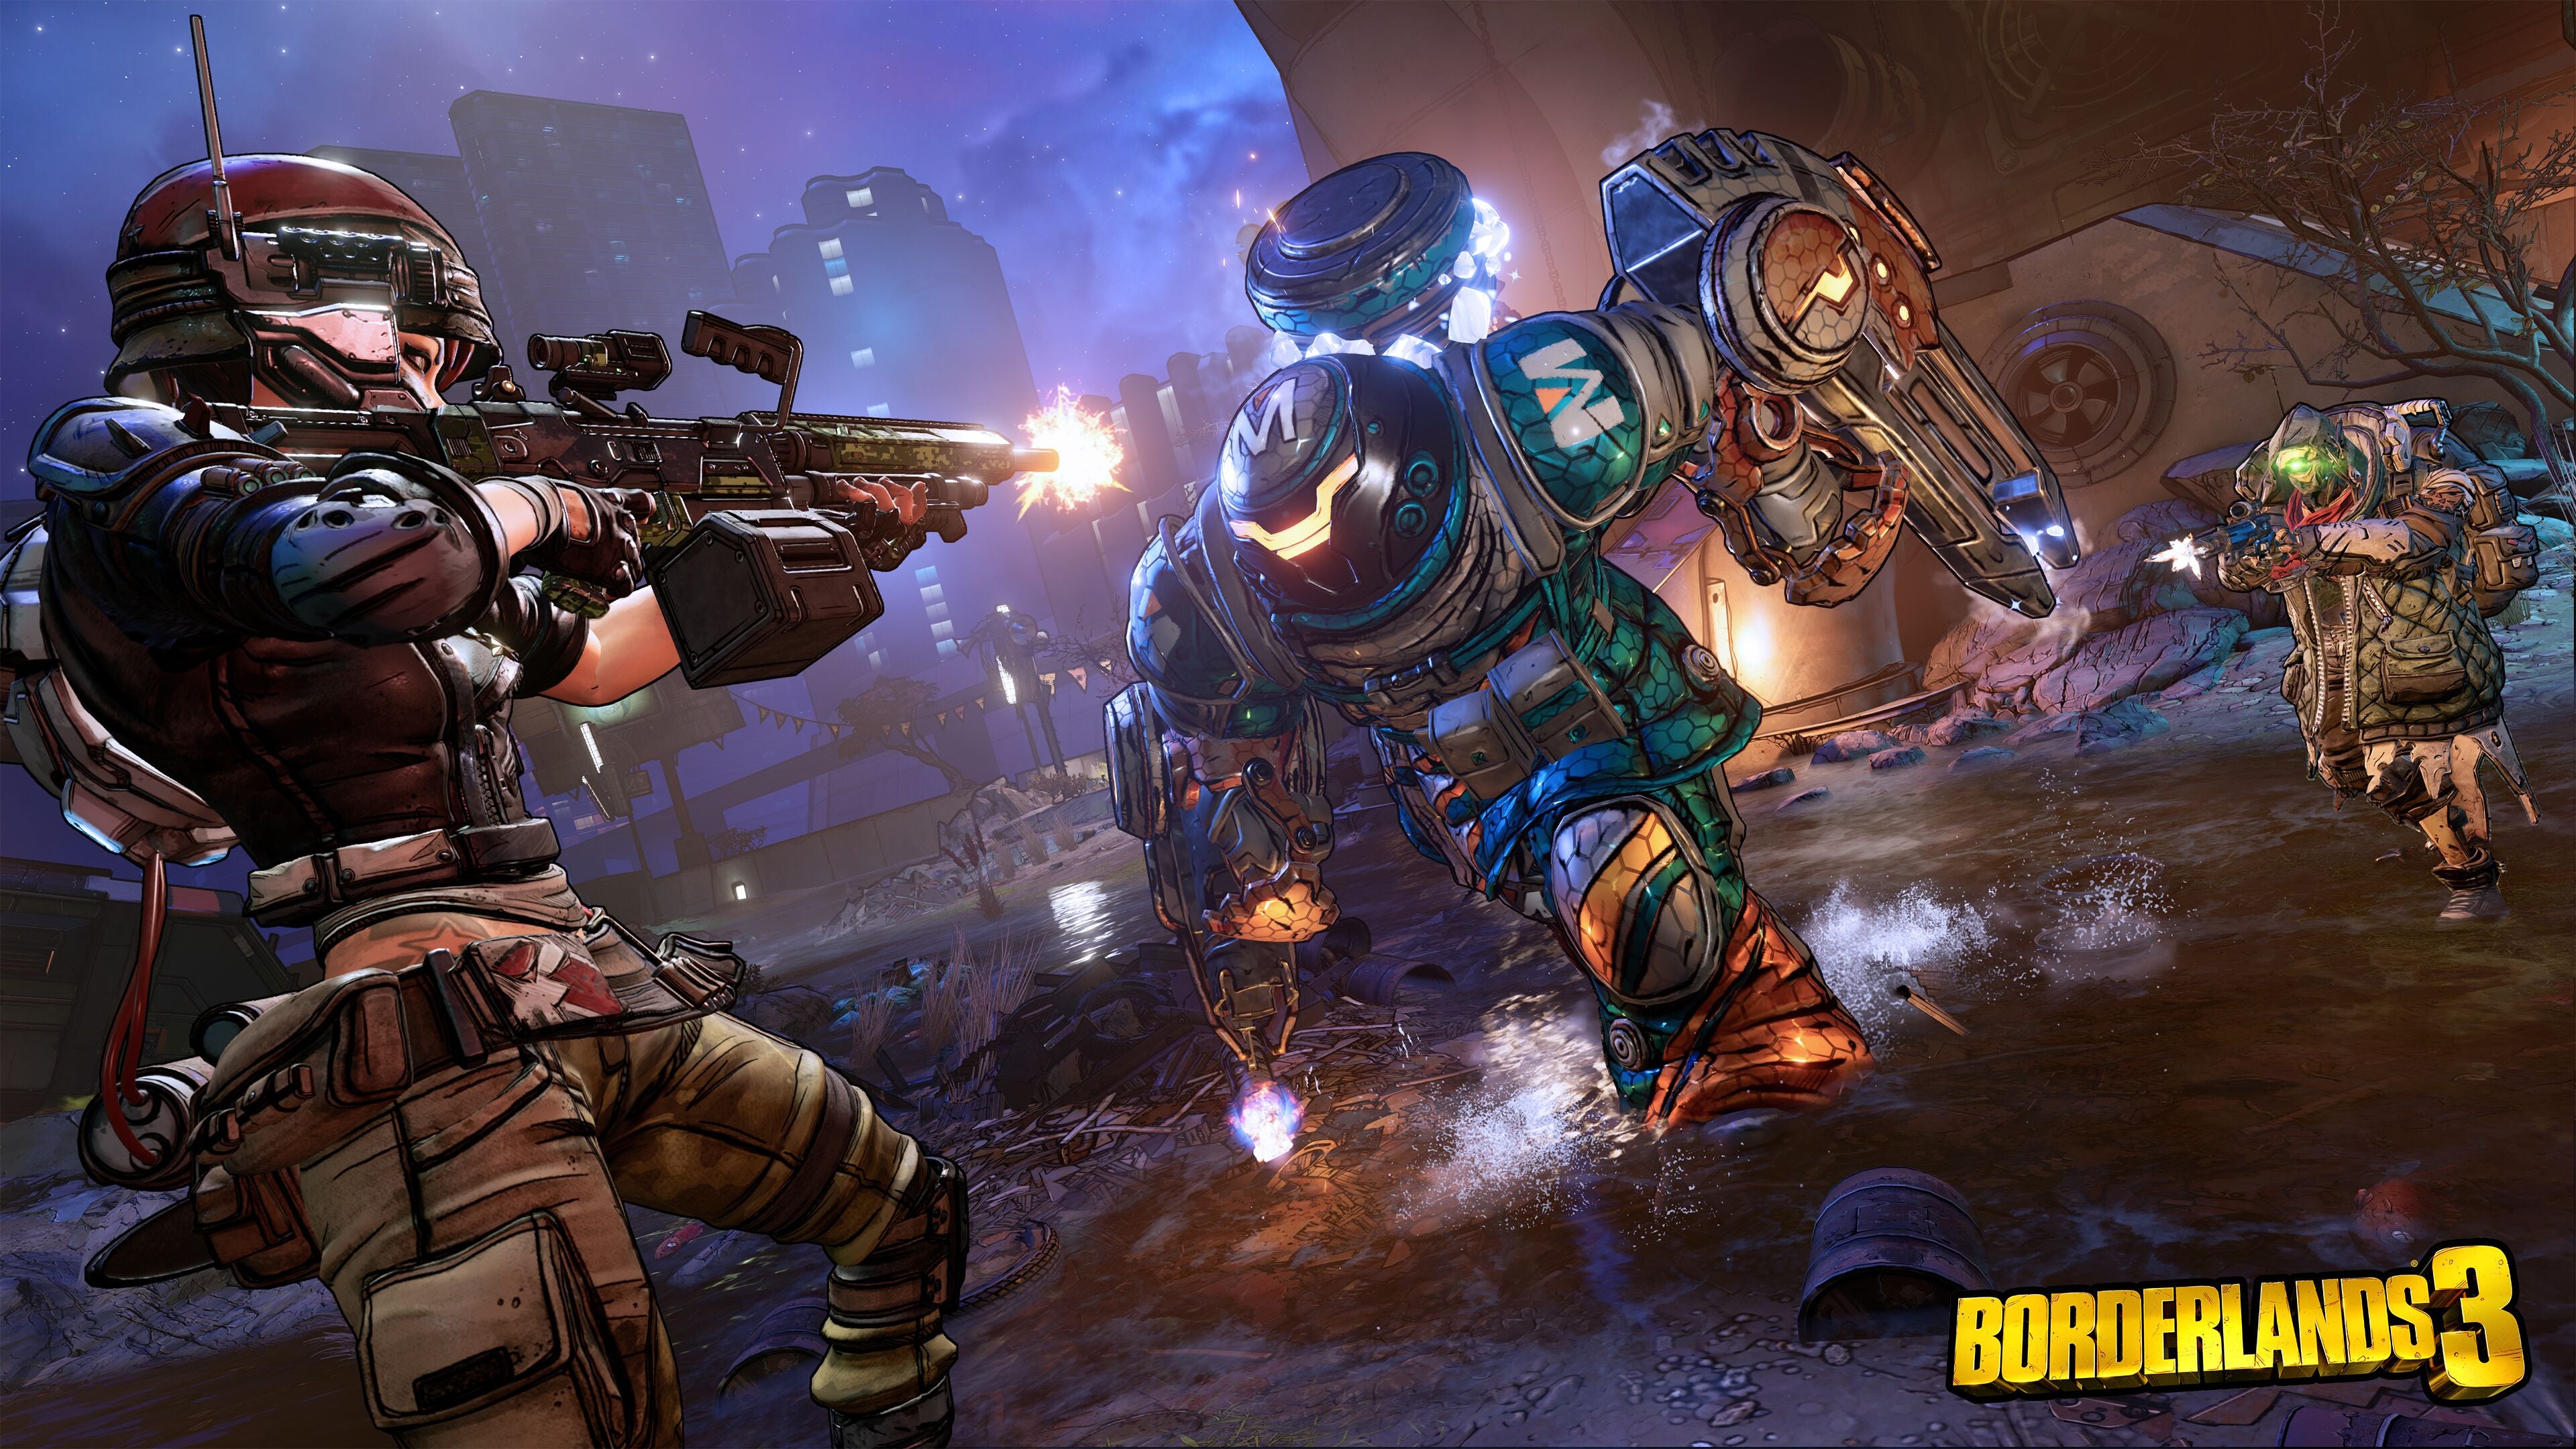 Image for Borderlands 3 endgame details coming at E3 - four story DLC packs planned, as well as raids and events